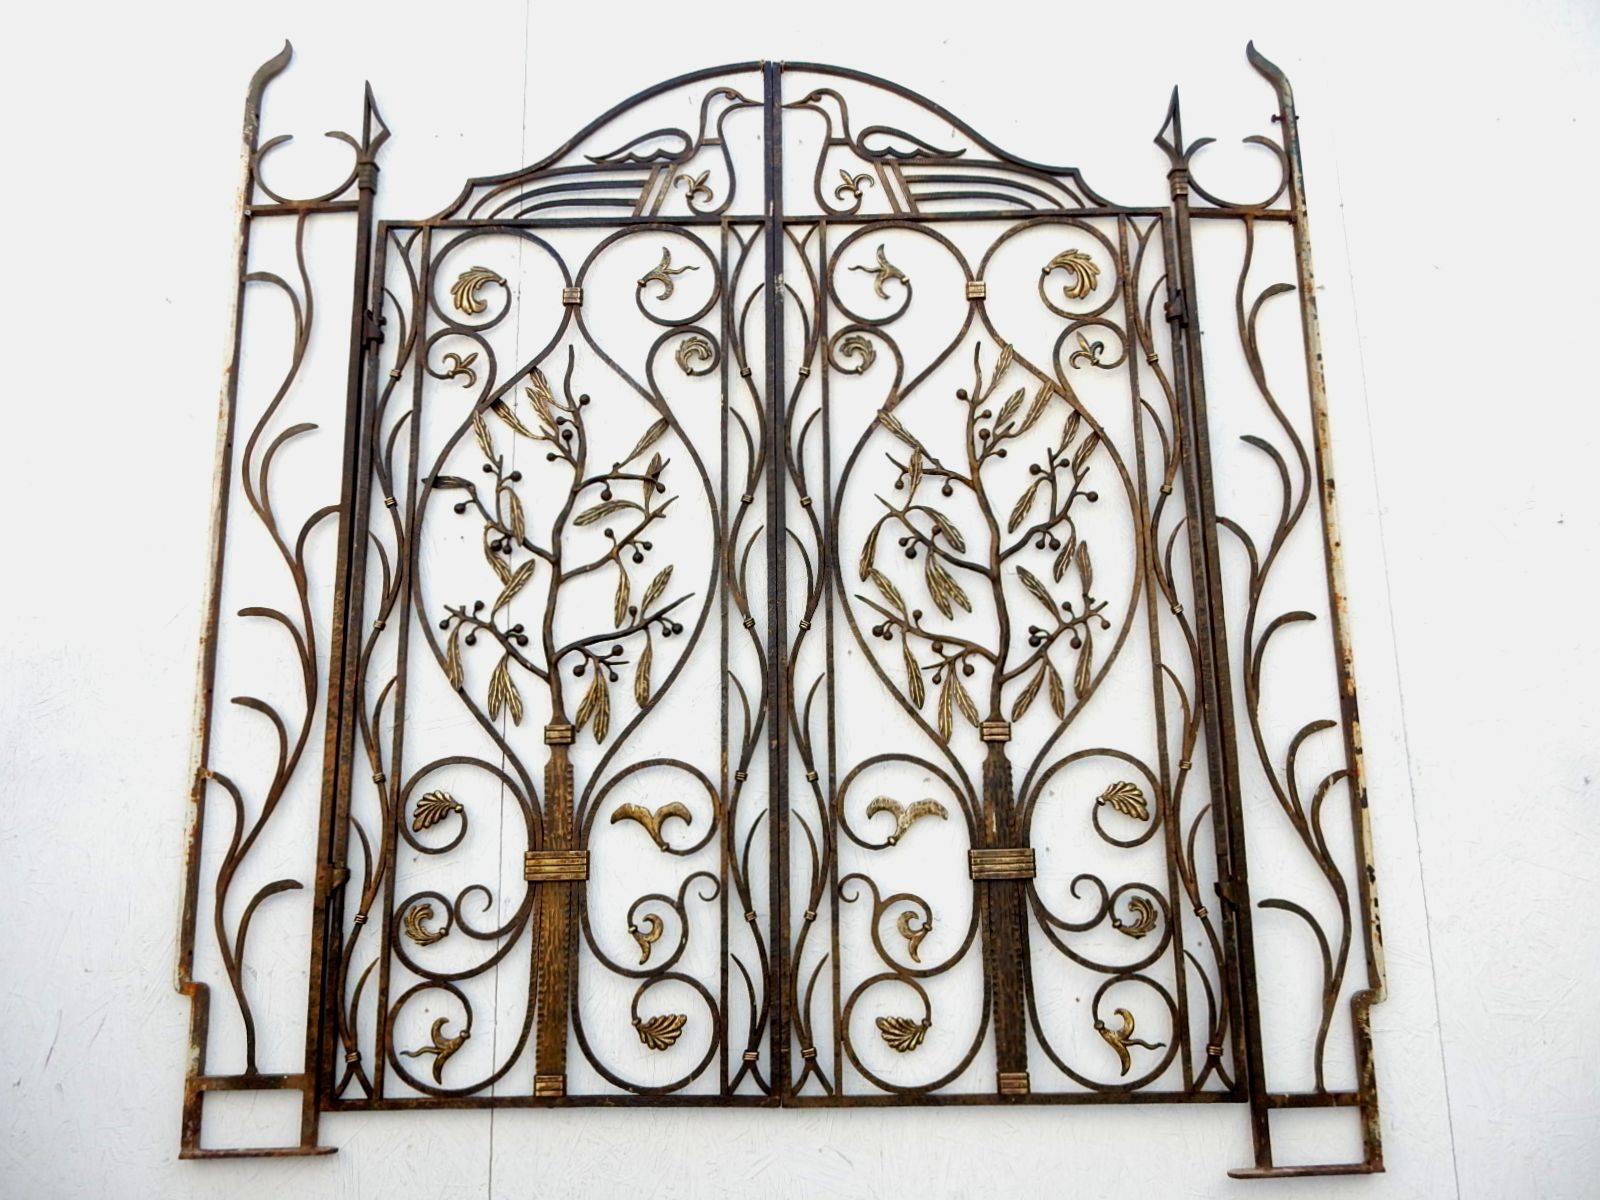 Early 20th Century French Art Nouveau Architectural Iron and Bronze Gate in manner of Edgar Brandt